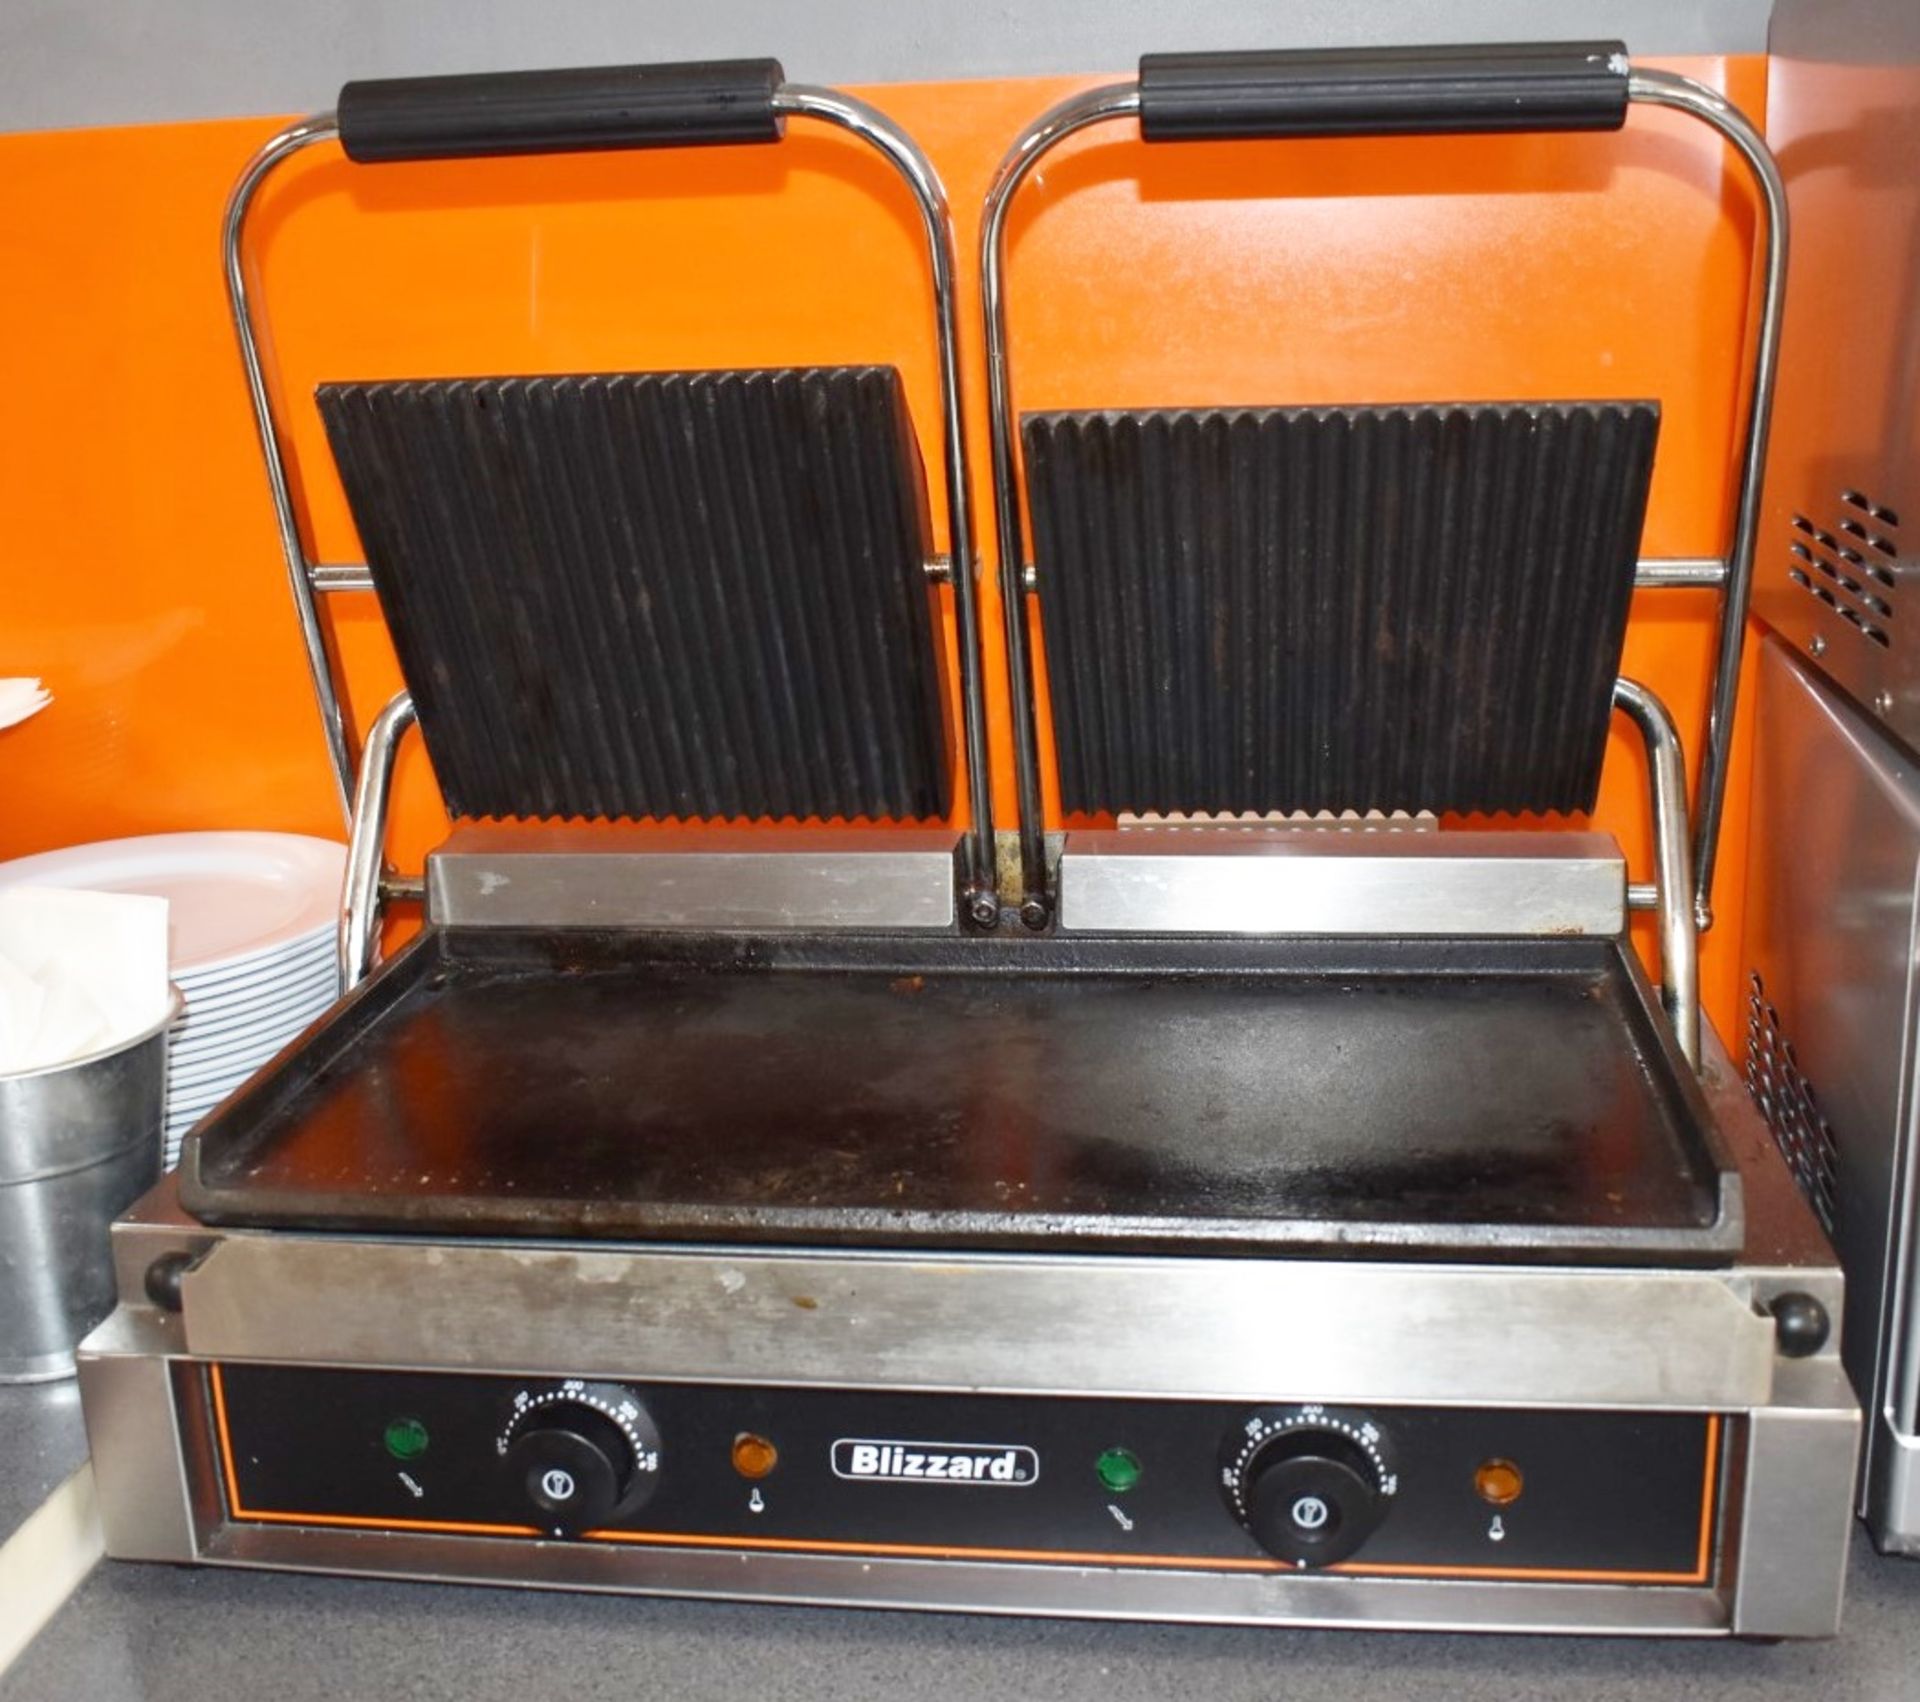 1 x Blizzard BRSCG2 Commercial Double Contact Grill - 240v - H21 x W57 x D40 cms -